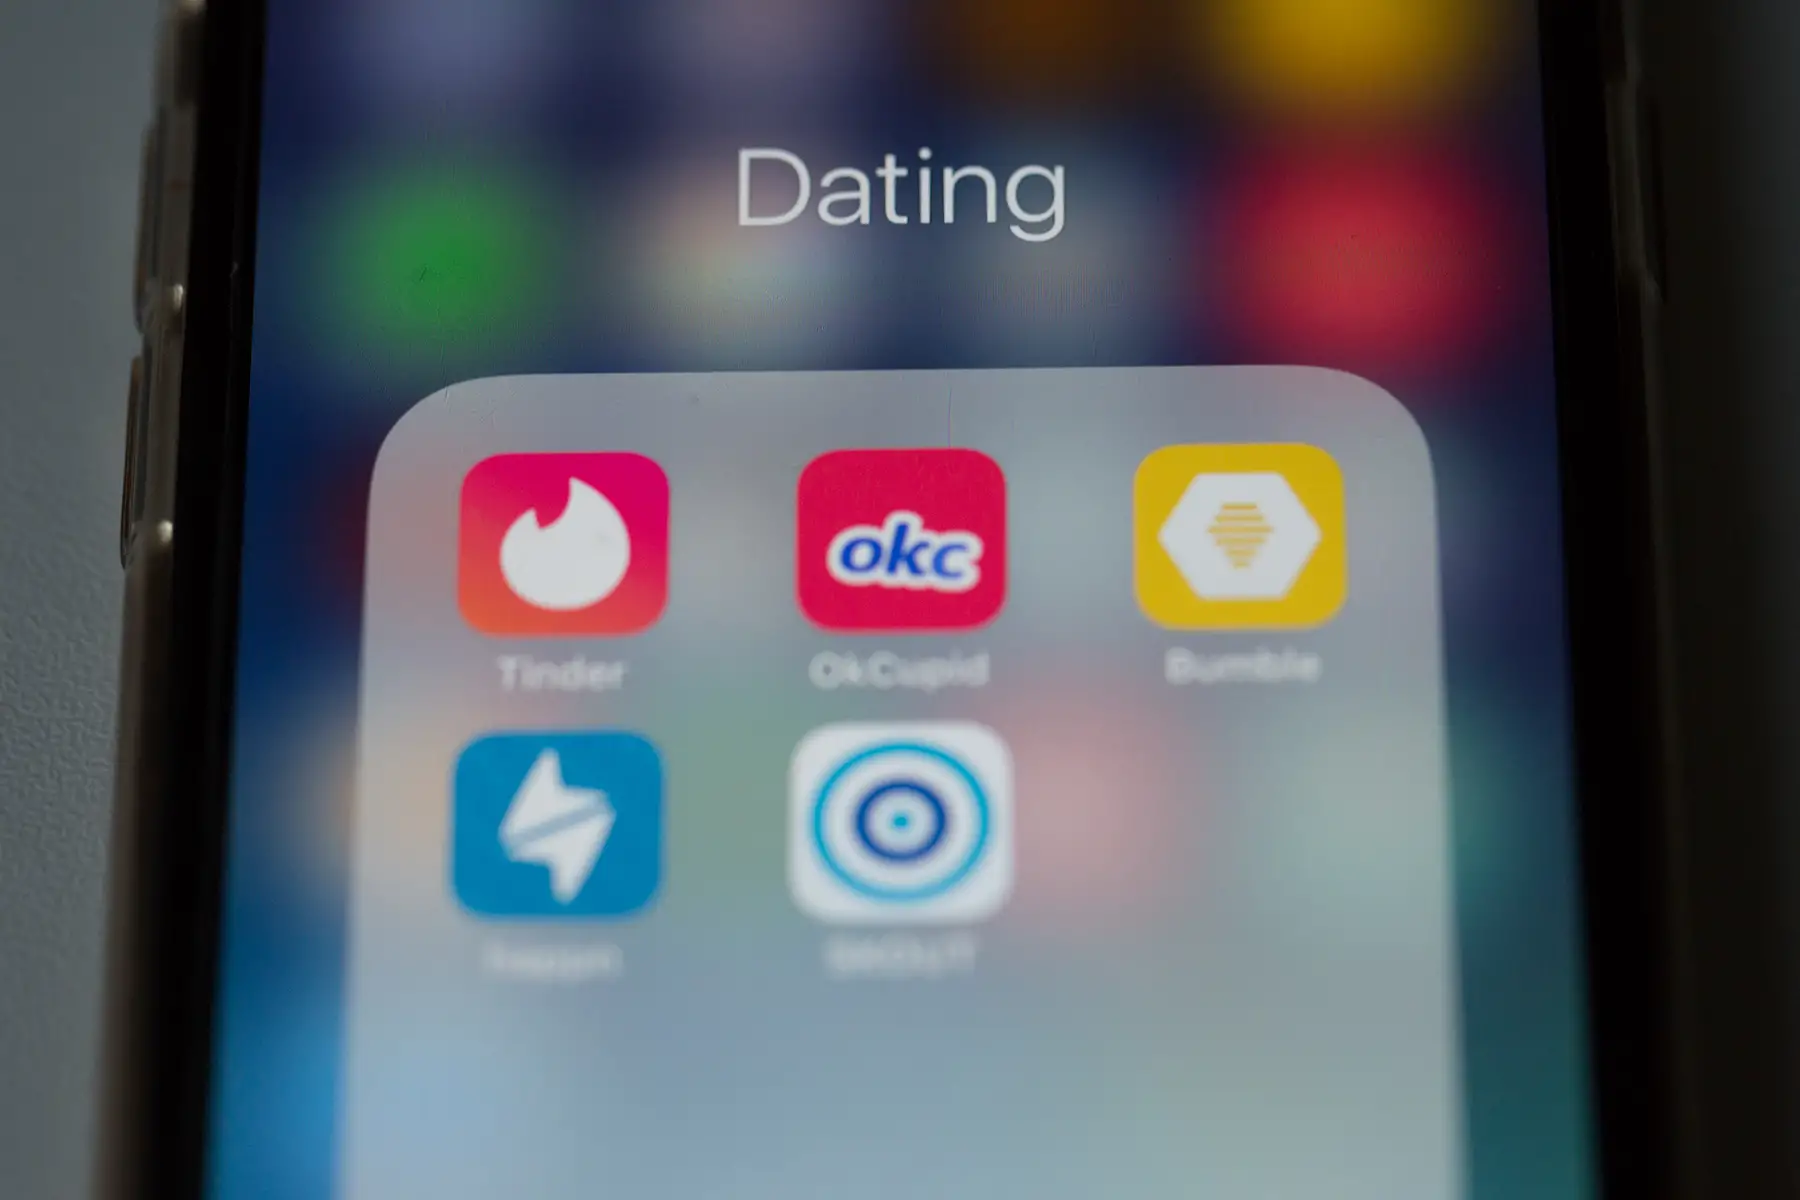 Various dating apps